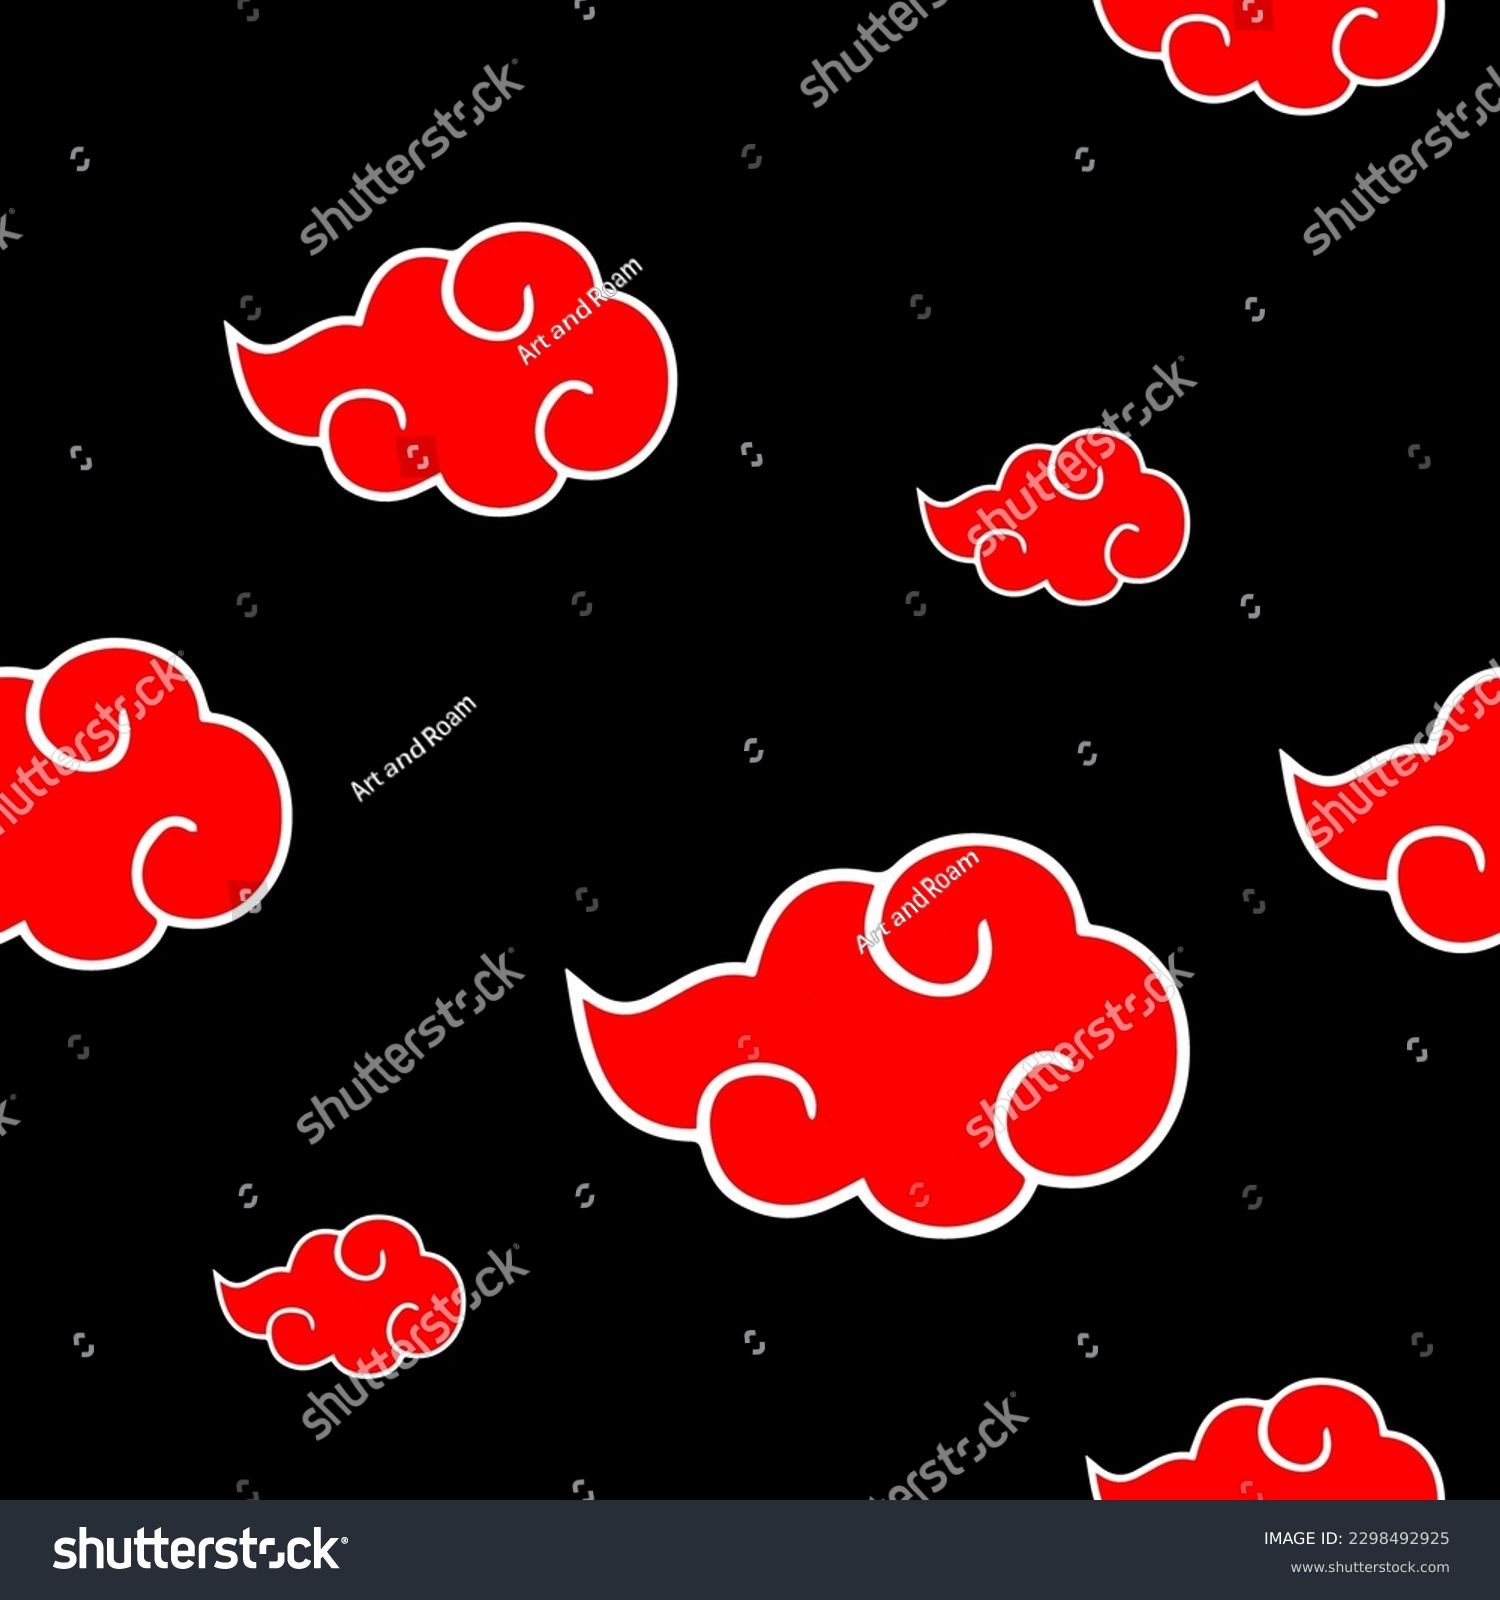 SVG of Japanese Clouds Seamless Pattern inspired by Anime and Manga. Vector graphic with red elements on black background. Asian style design for textile, apparel, clothing, background. svg